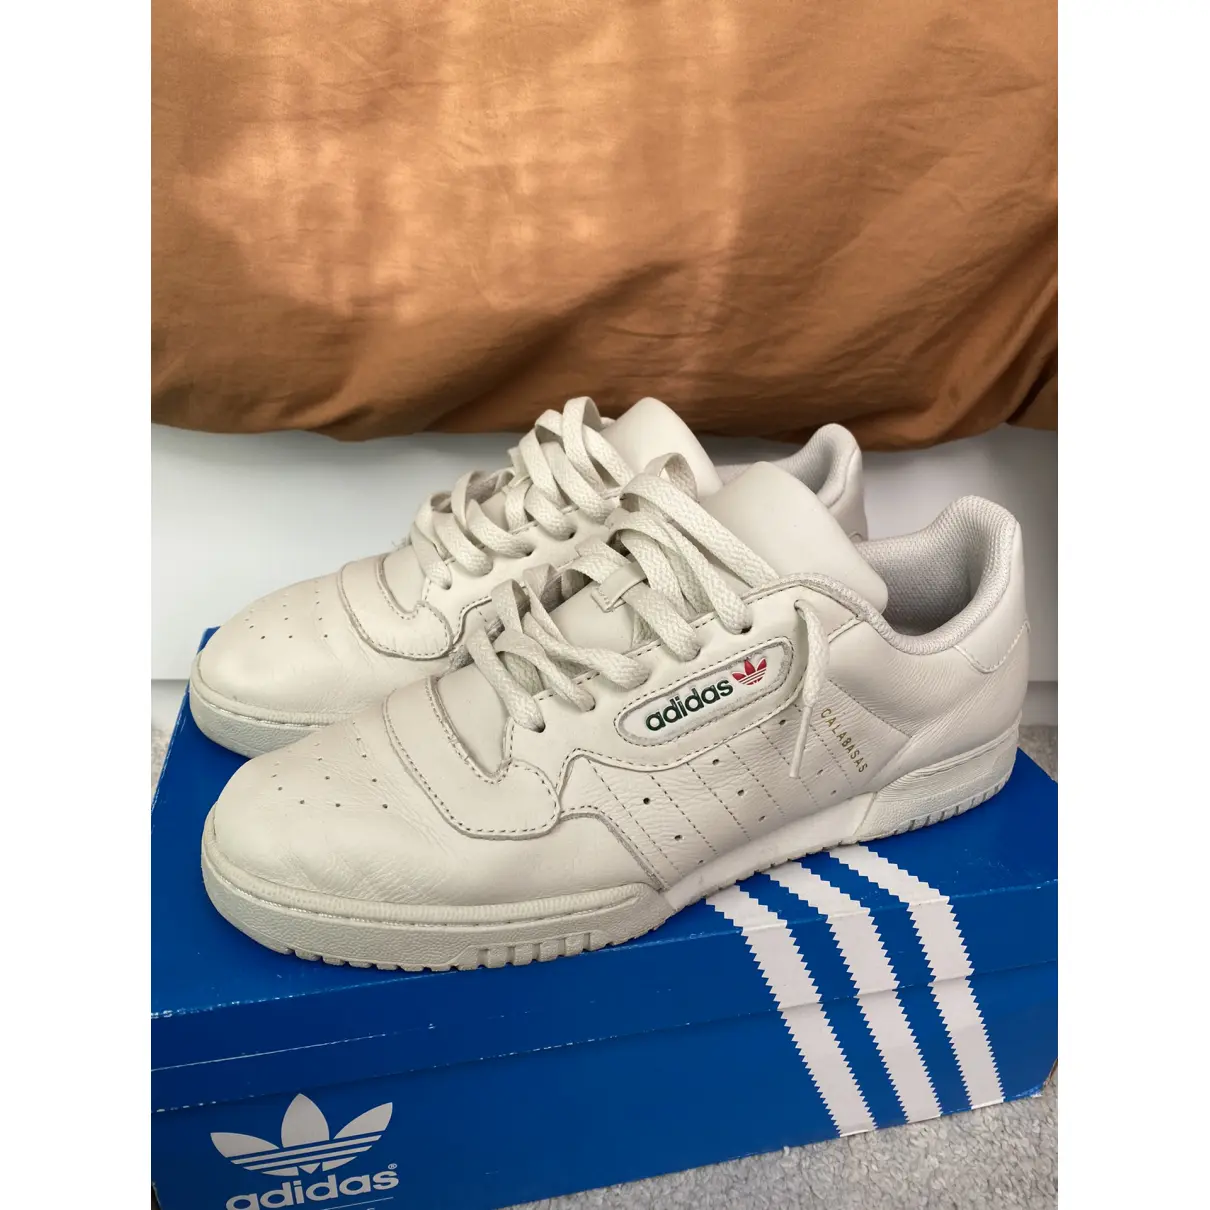 Buy Yeezy x Adidas POWERPHASE leather low trainers online